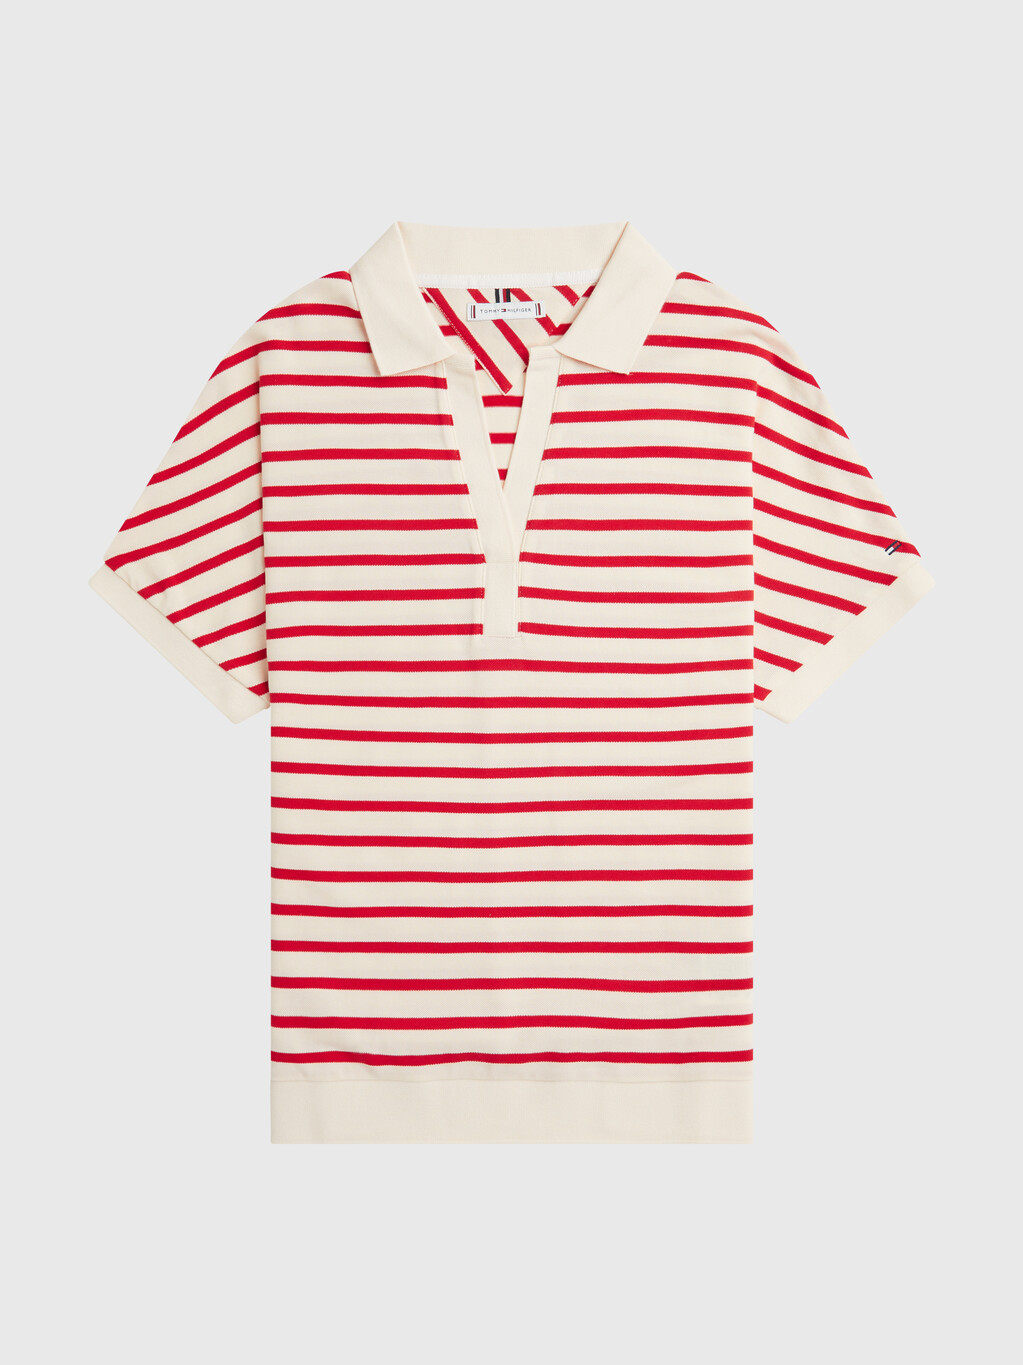 Stripe Relaxed Fit Polo, Breton Ancient White/Fireworks M, hi-res